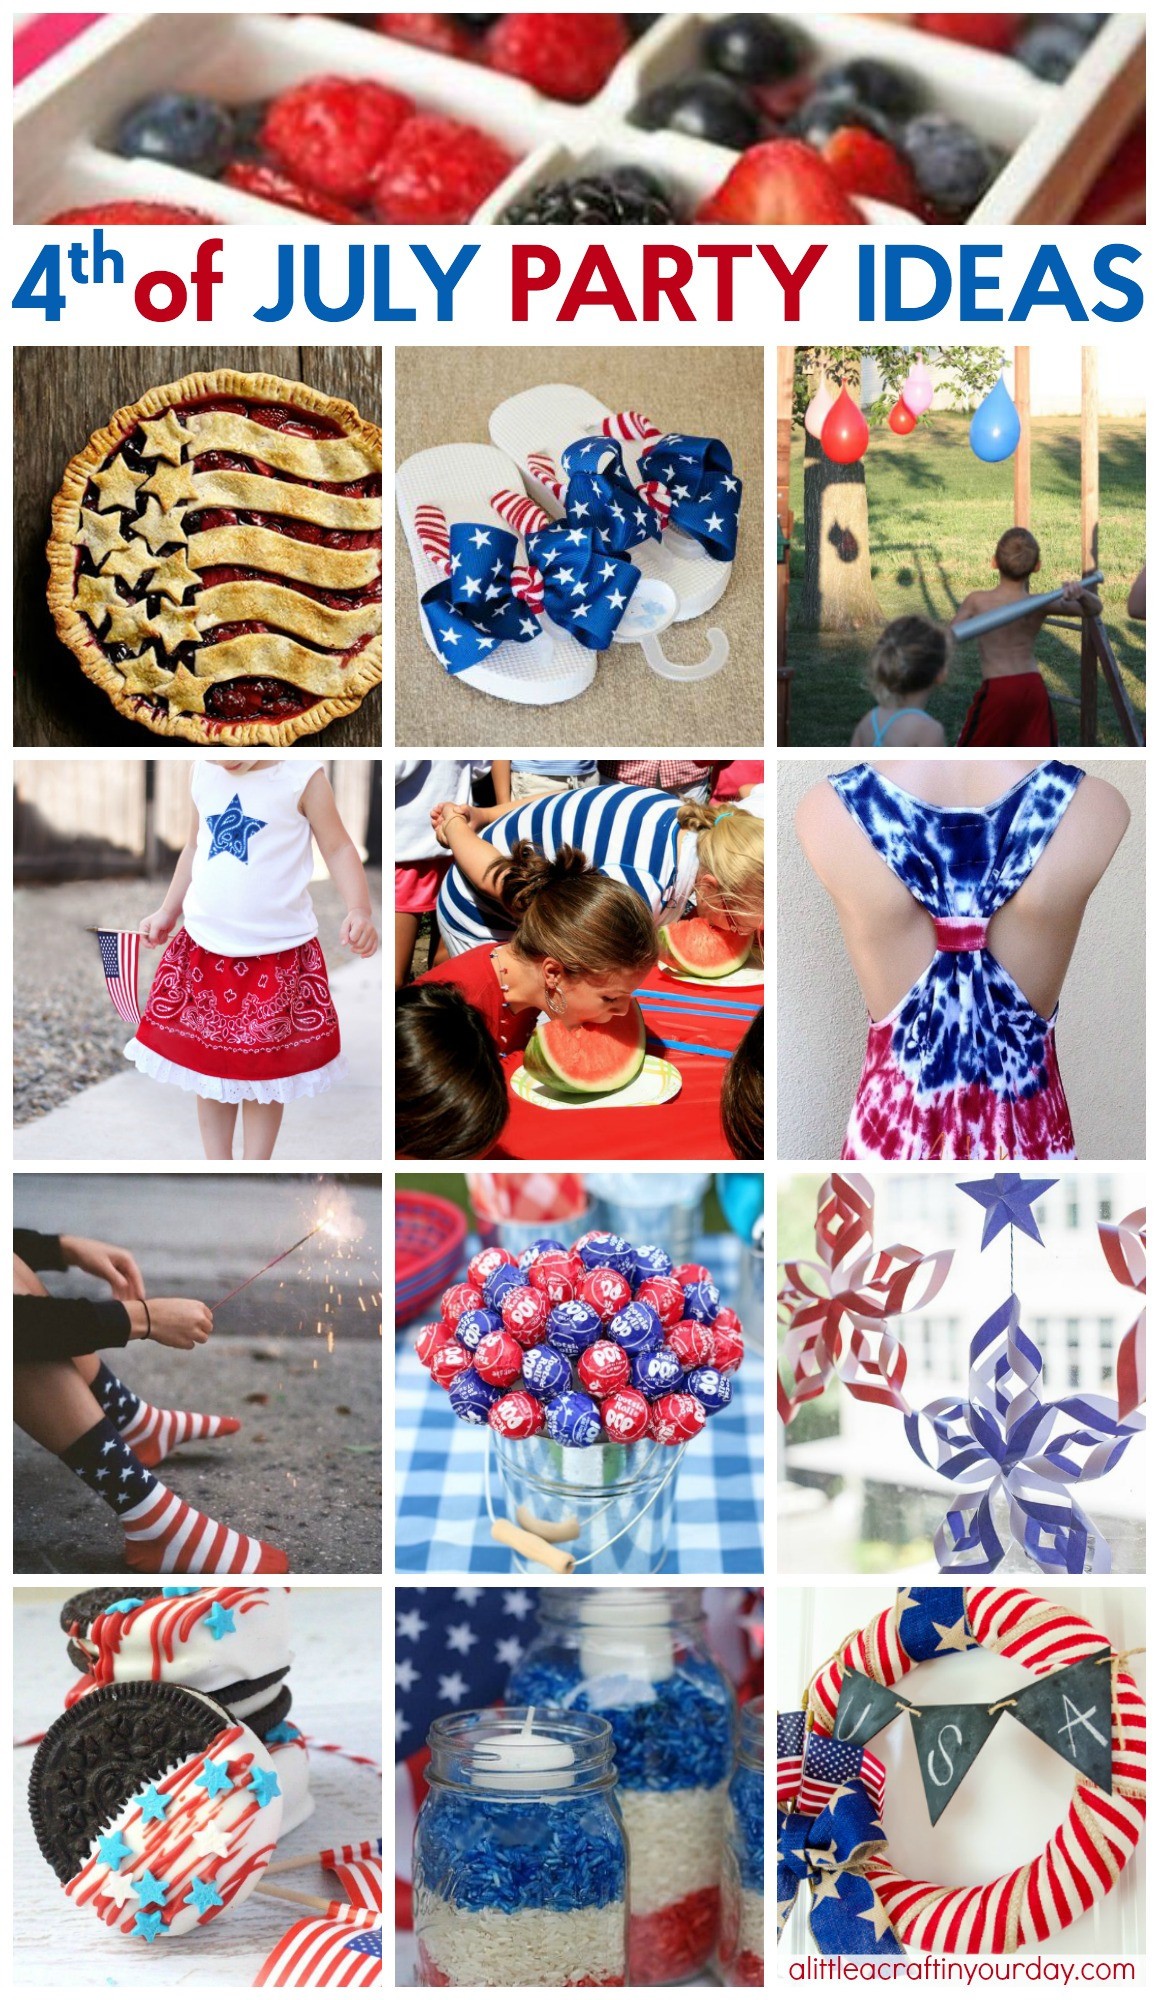 4th Of July Party Decorations
 44 Way Cool Fourth of July Party Ideas A Little Craft In